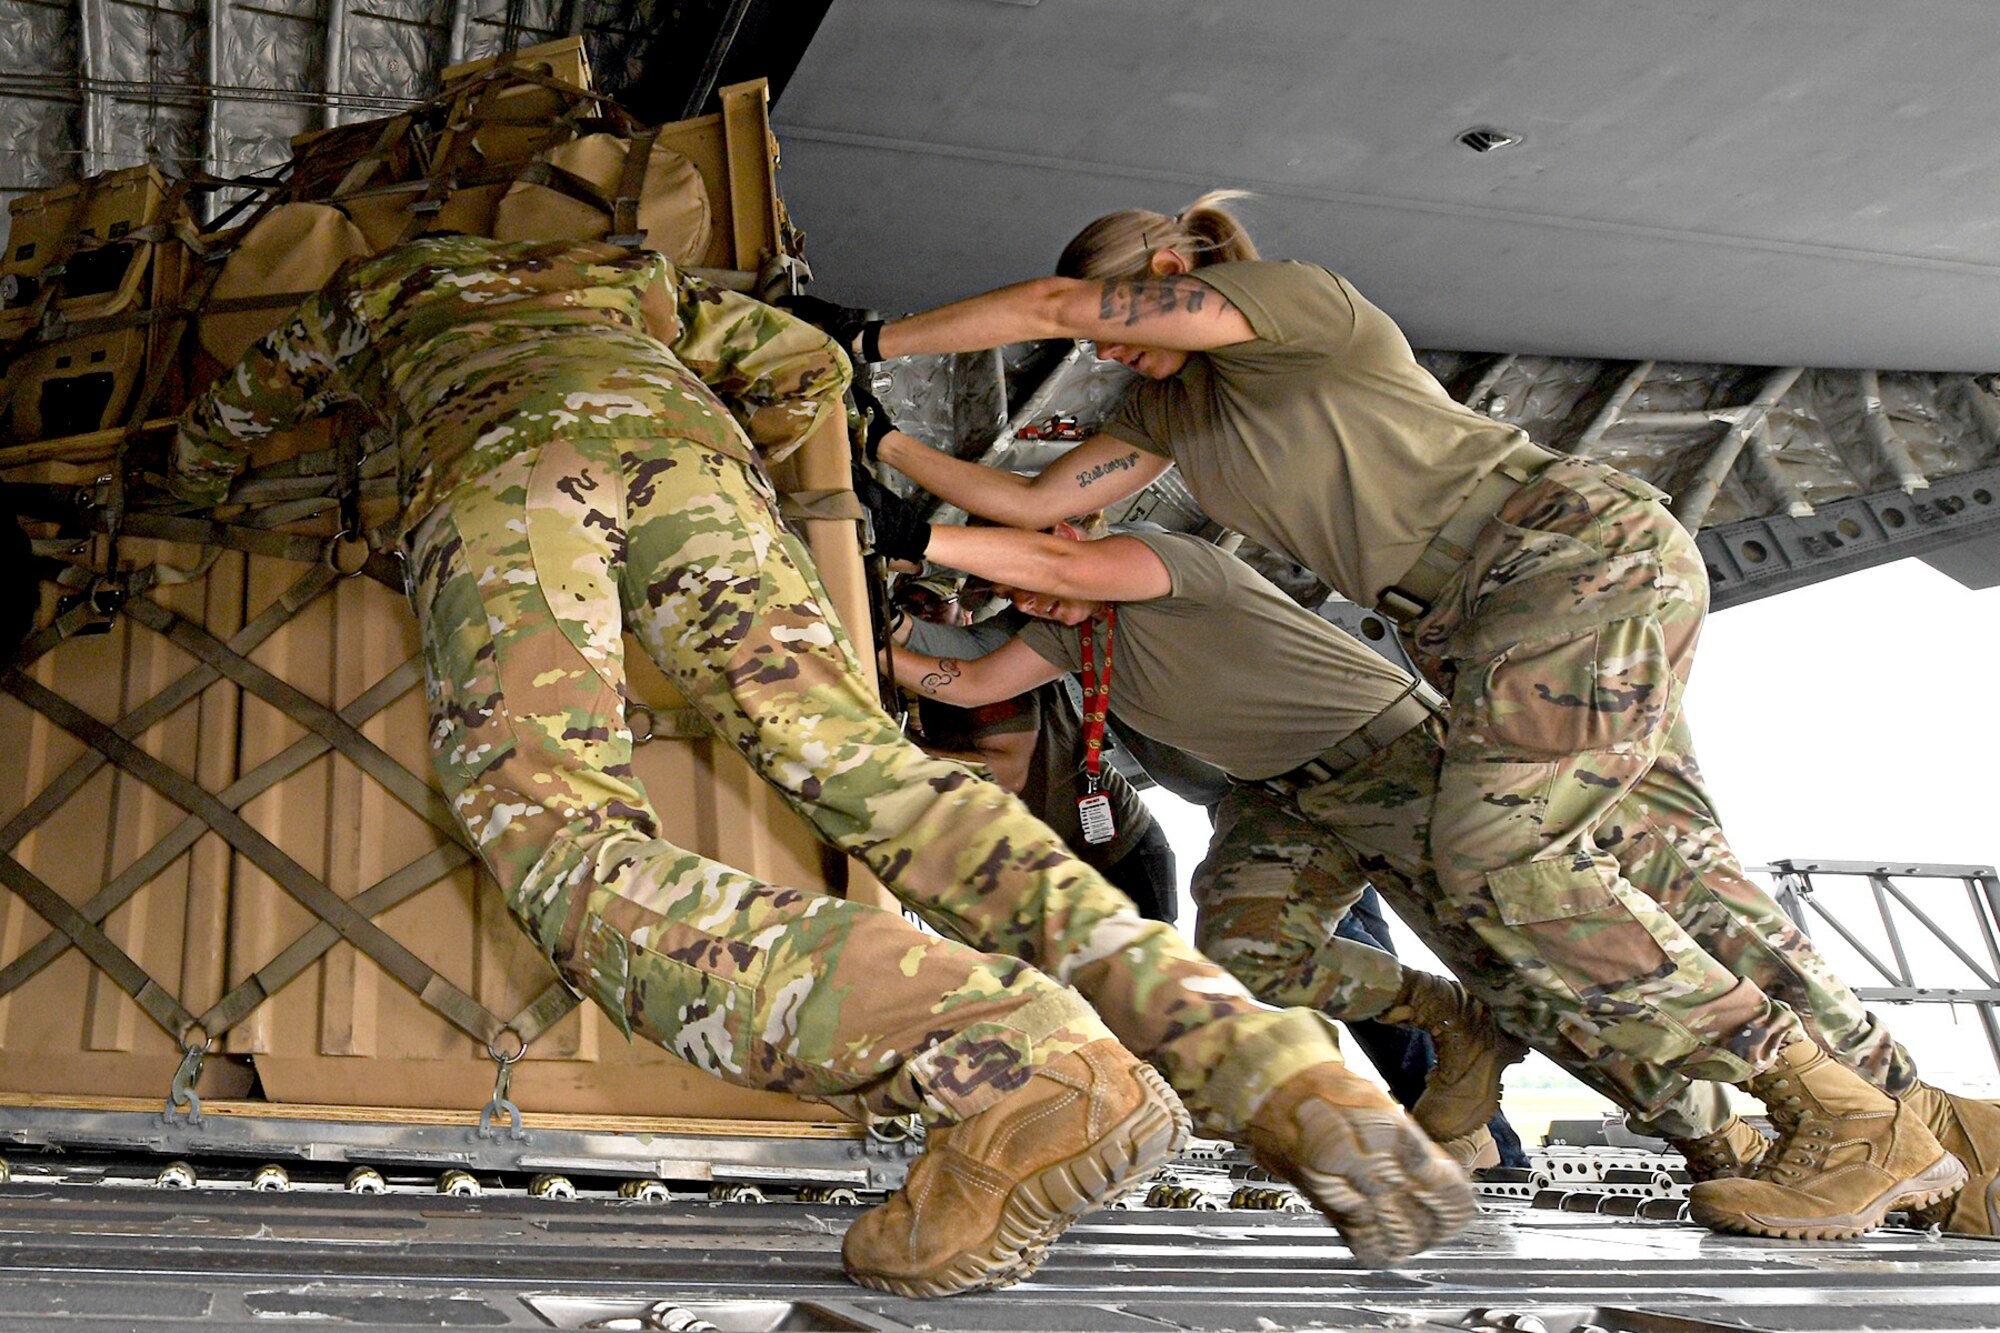 Airmen from Grissom and the 512th Airlift Wing, Dover Air Force Base, Del., load a C-17 Globemaster III from the 512th AW, at Grissom, June 1, 2021. The cargo was shipped to Hawaii for an exercise called Pacific Warriorz 2021.  (U.S. Air Force photo/Staff Sgt. Chris Massey)